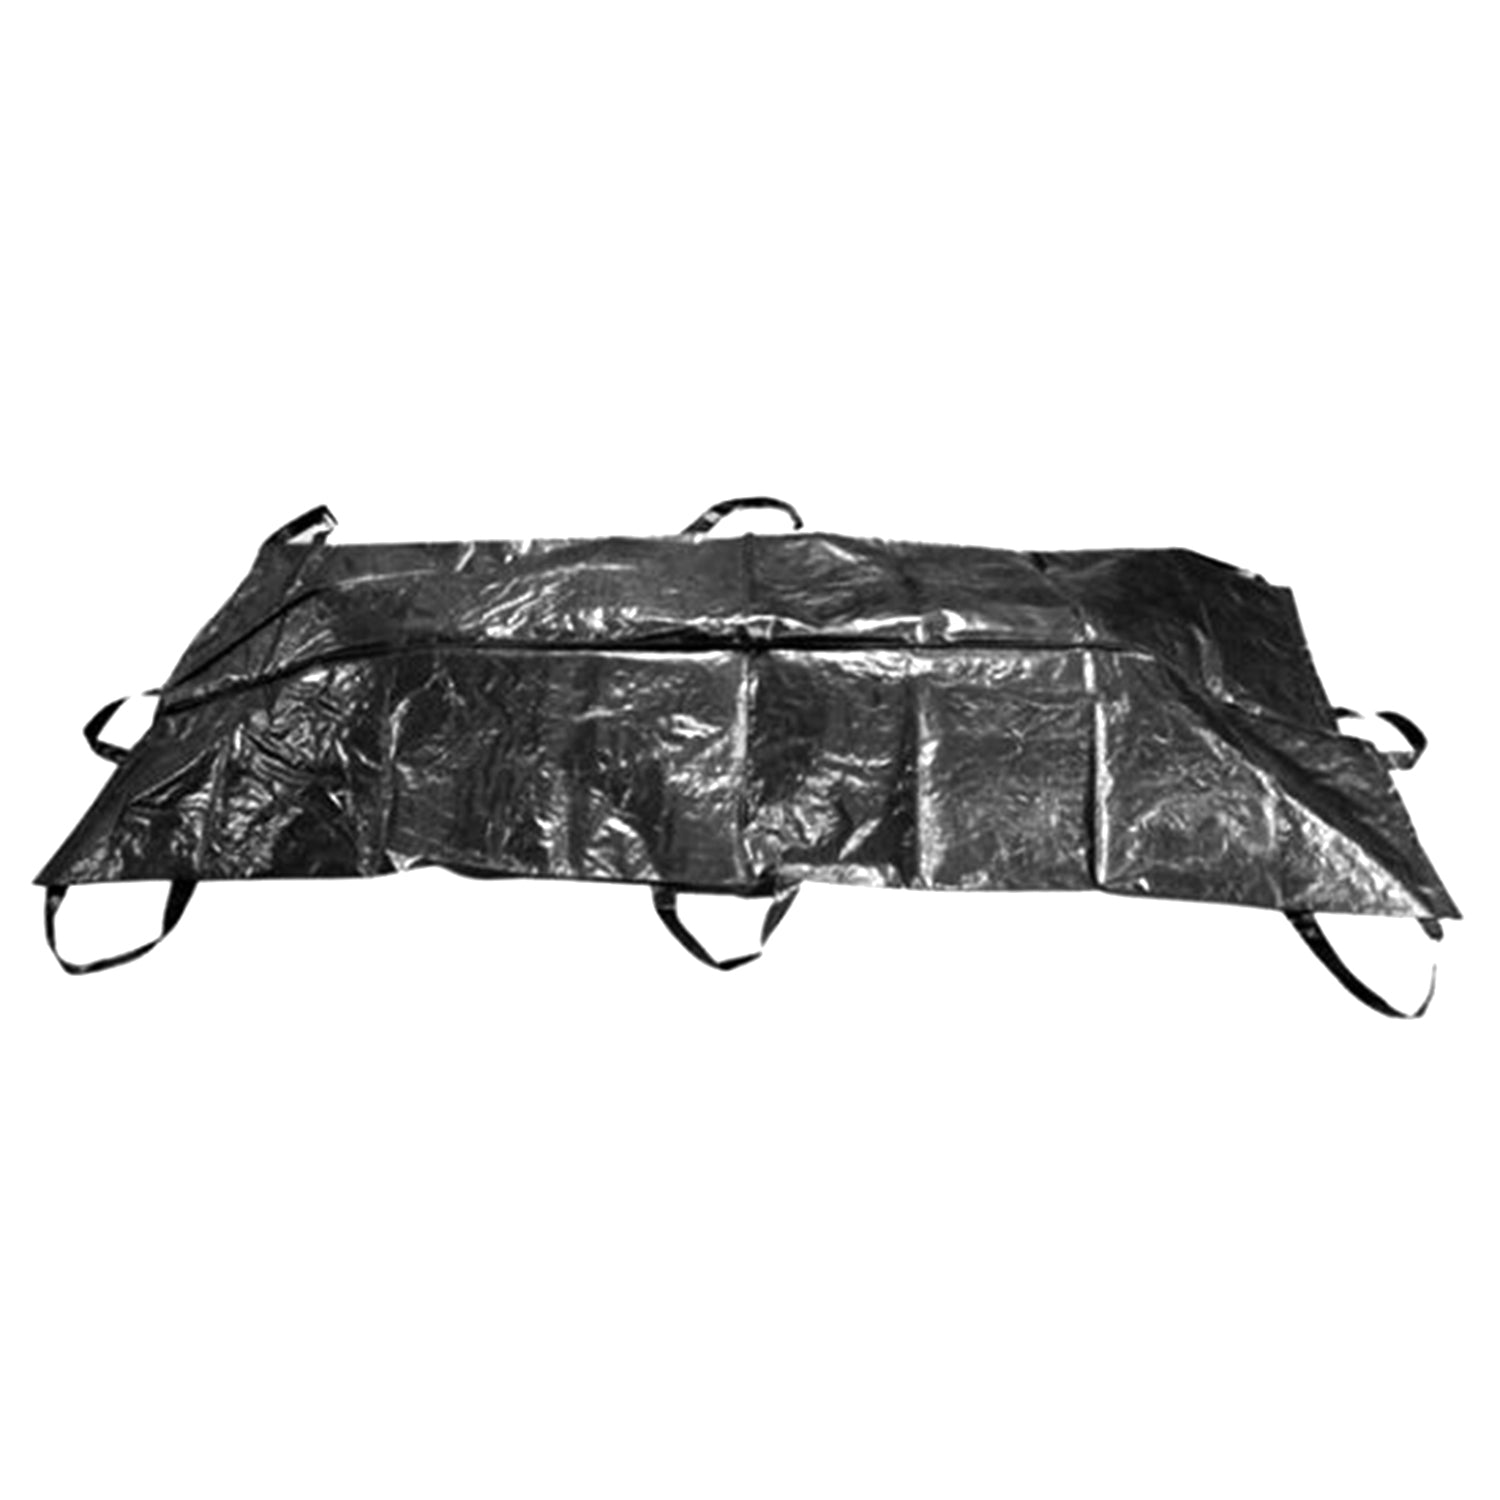 Dixie Body Bag Soft Stretcher Combo- WITH 3 Patient tags